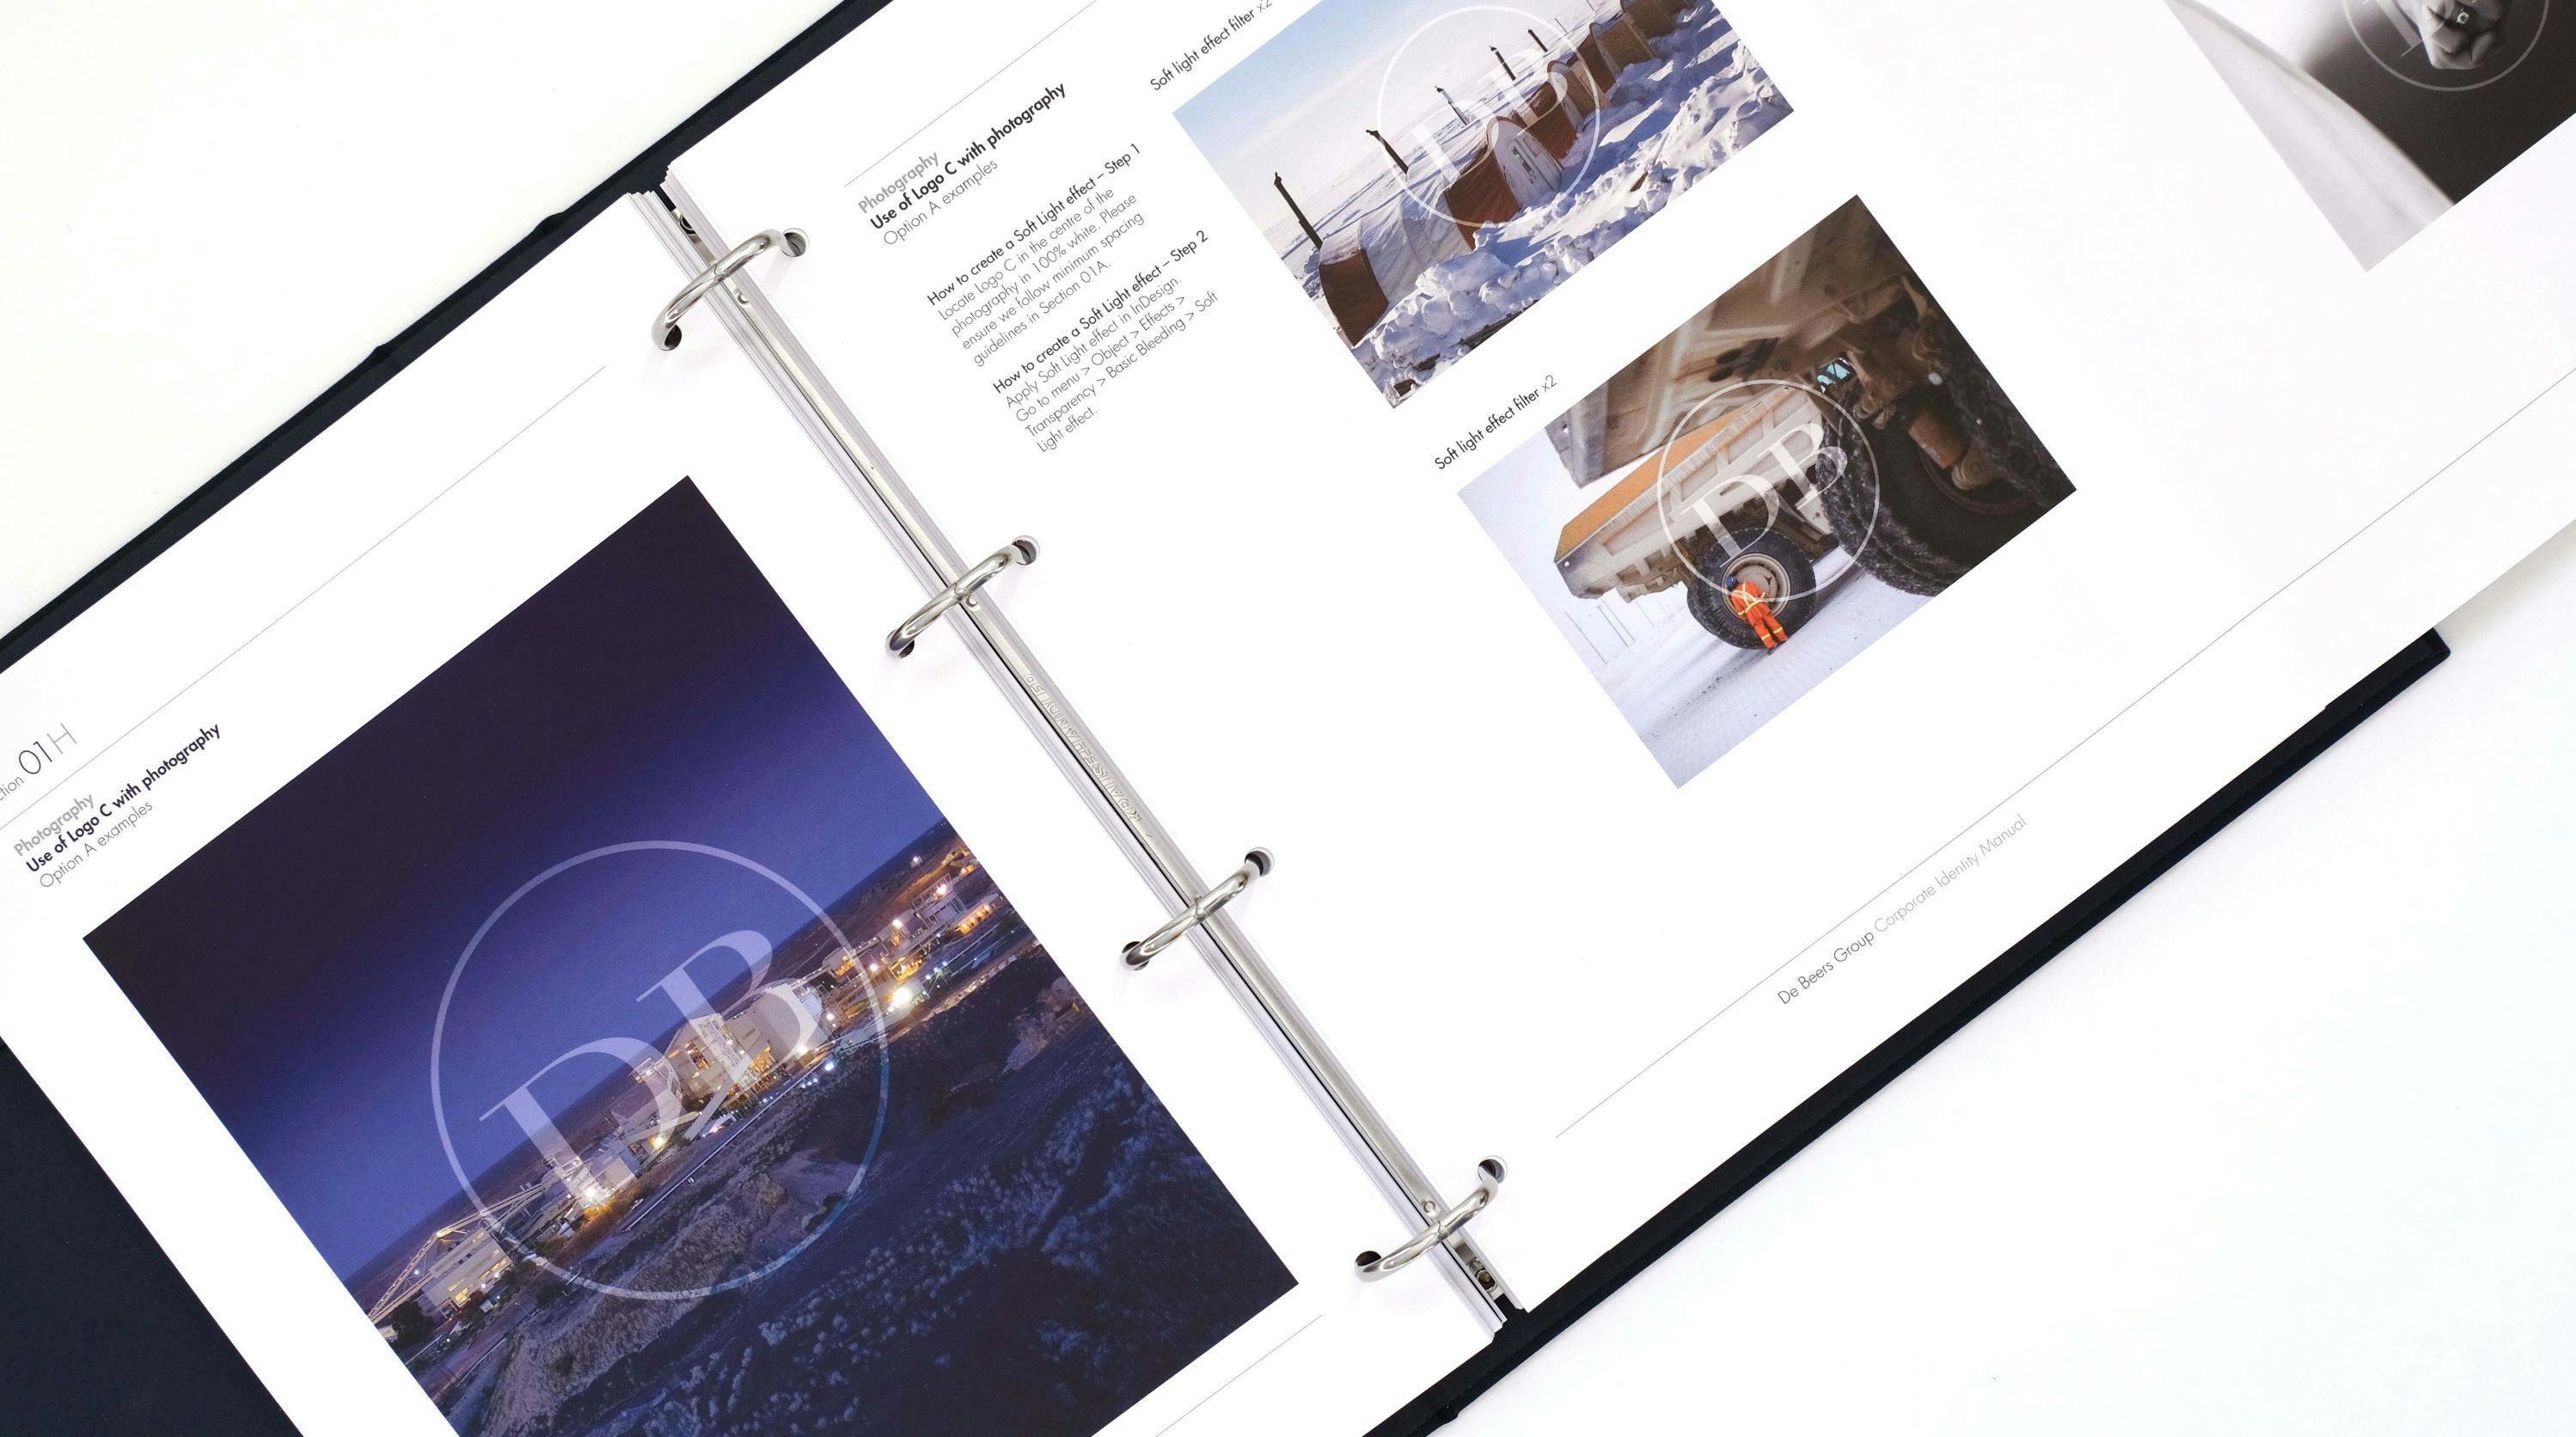 Looking inside the De Beers Group Corporate Identity Manual